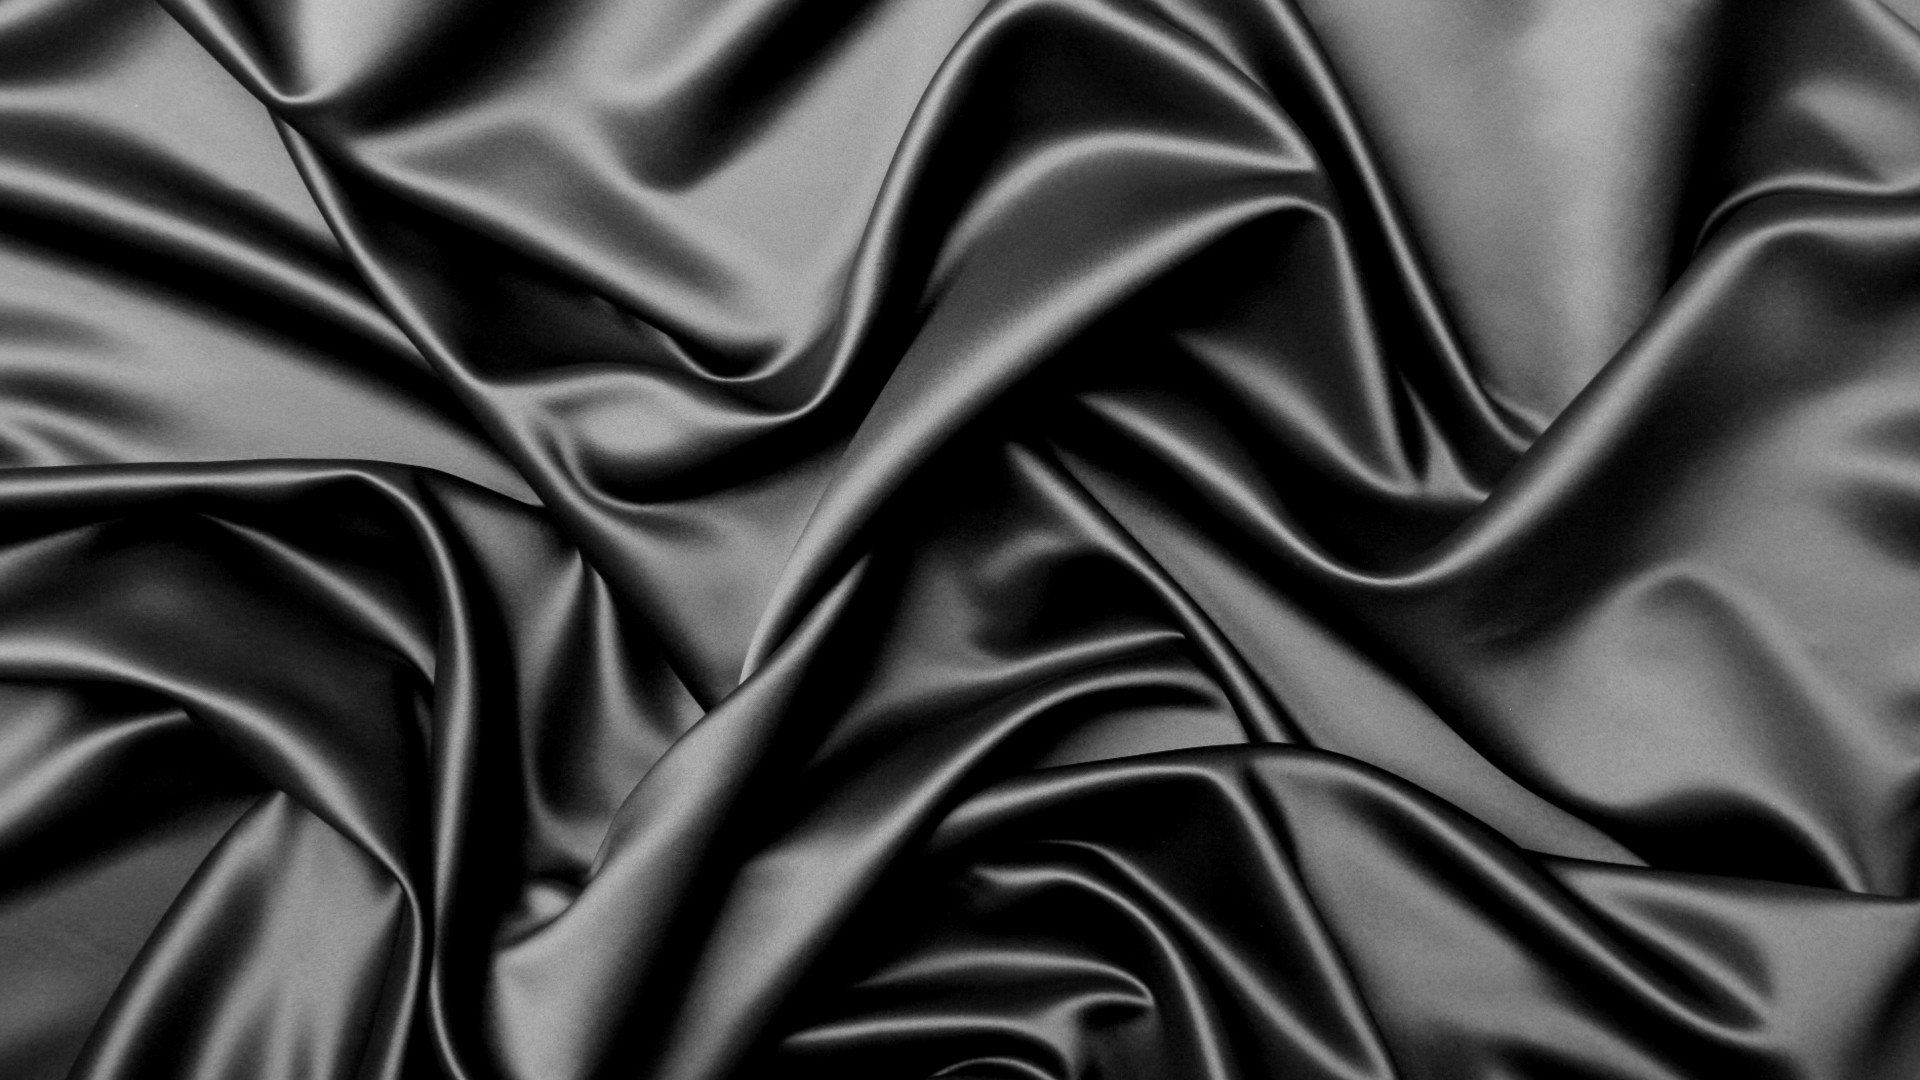 Best Black Silk Wallpaper with high-resolution 1920x1080 pixel. You can use this wallpaper for your Windows and Mac OS computers as well as your Android and iPhone smartphones